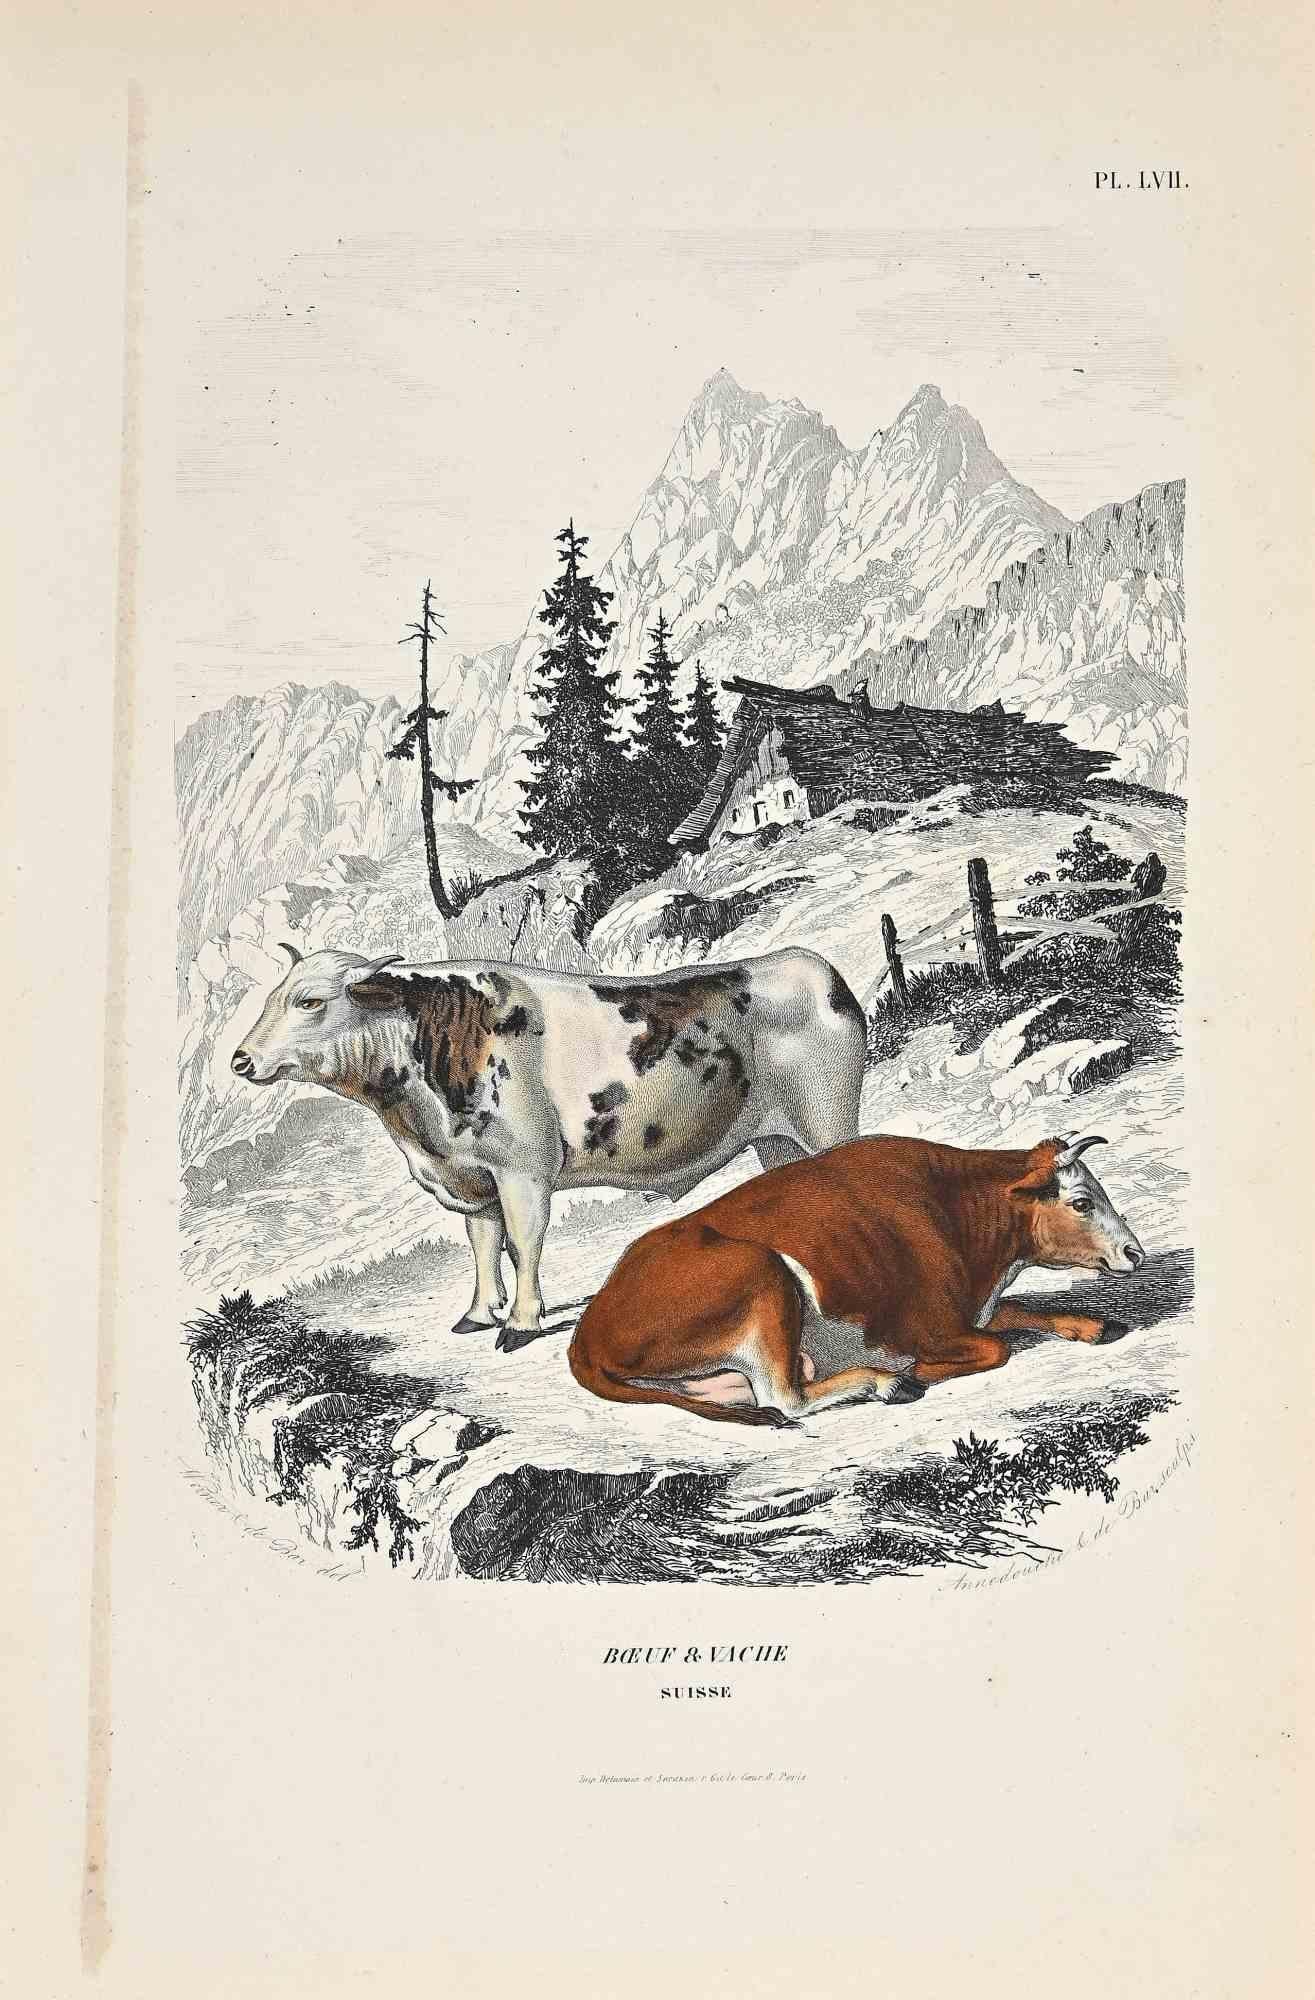 The Cows is an original colored lithograph on ivory-colored paper, realized by Paul Gervais (1816-1879). The artwork is from The Series of "Les Trois Règnes de la Nature", and was published in 1854.

Good conditions

Titled on the lower.

The series